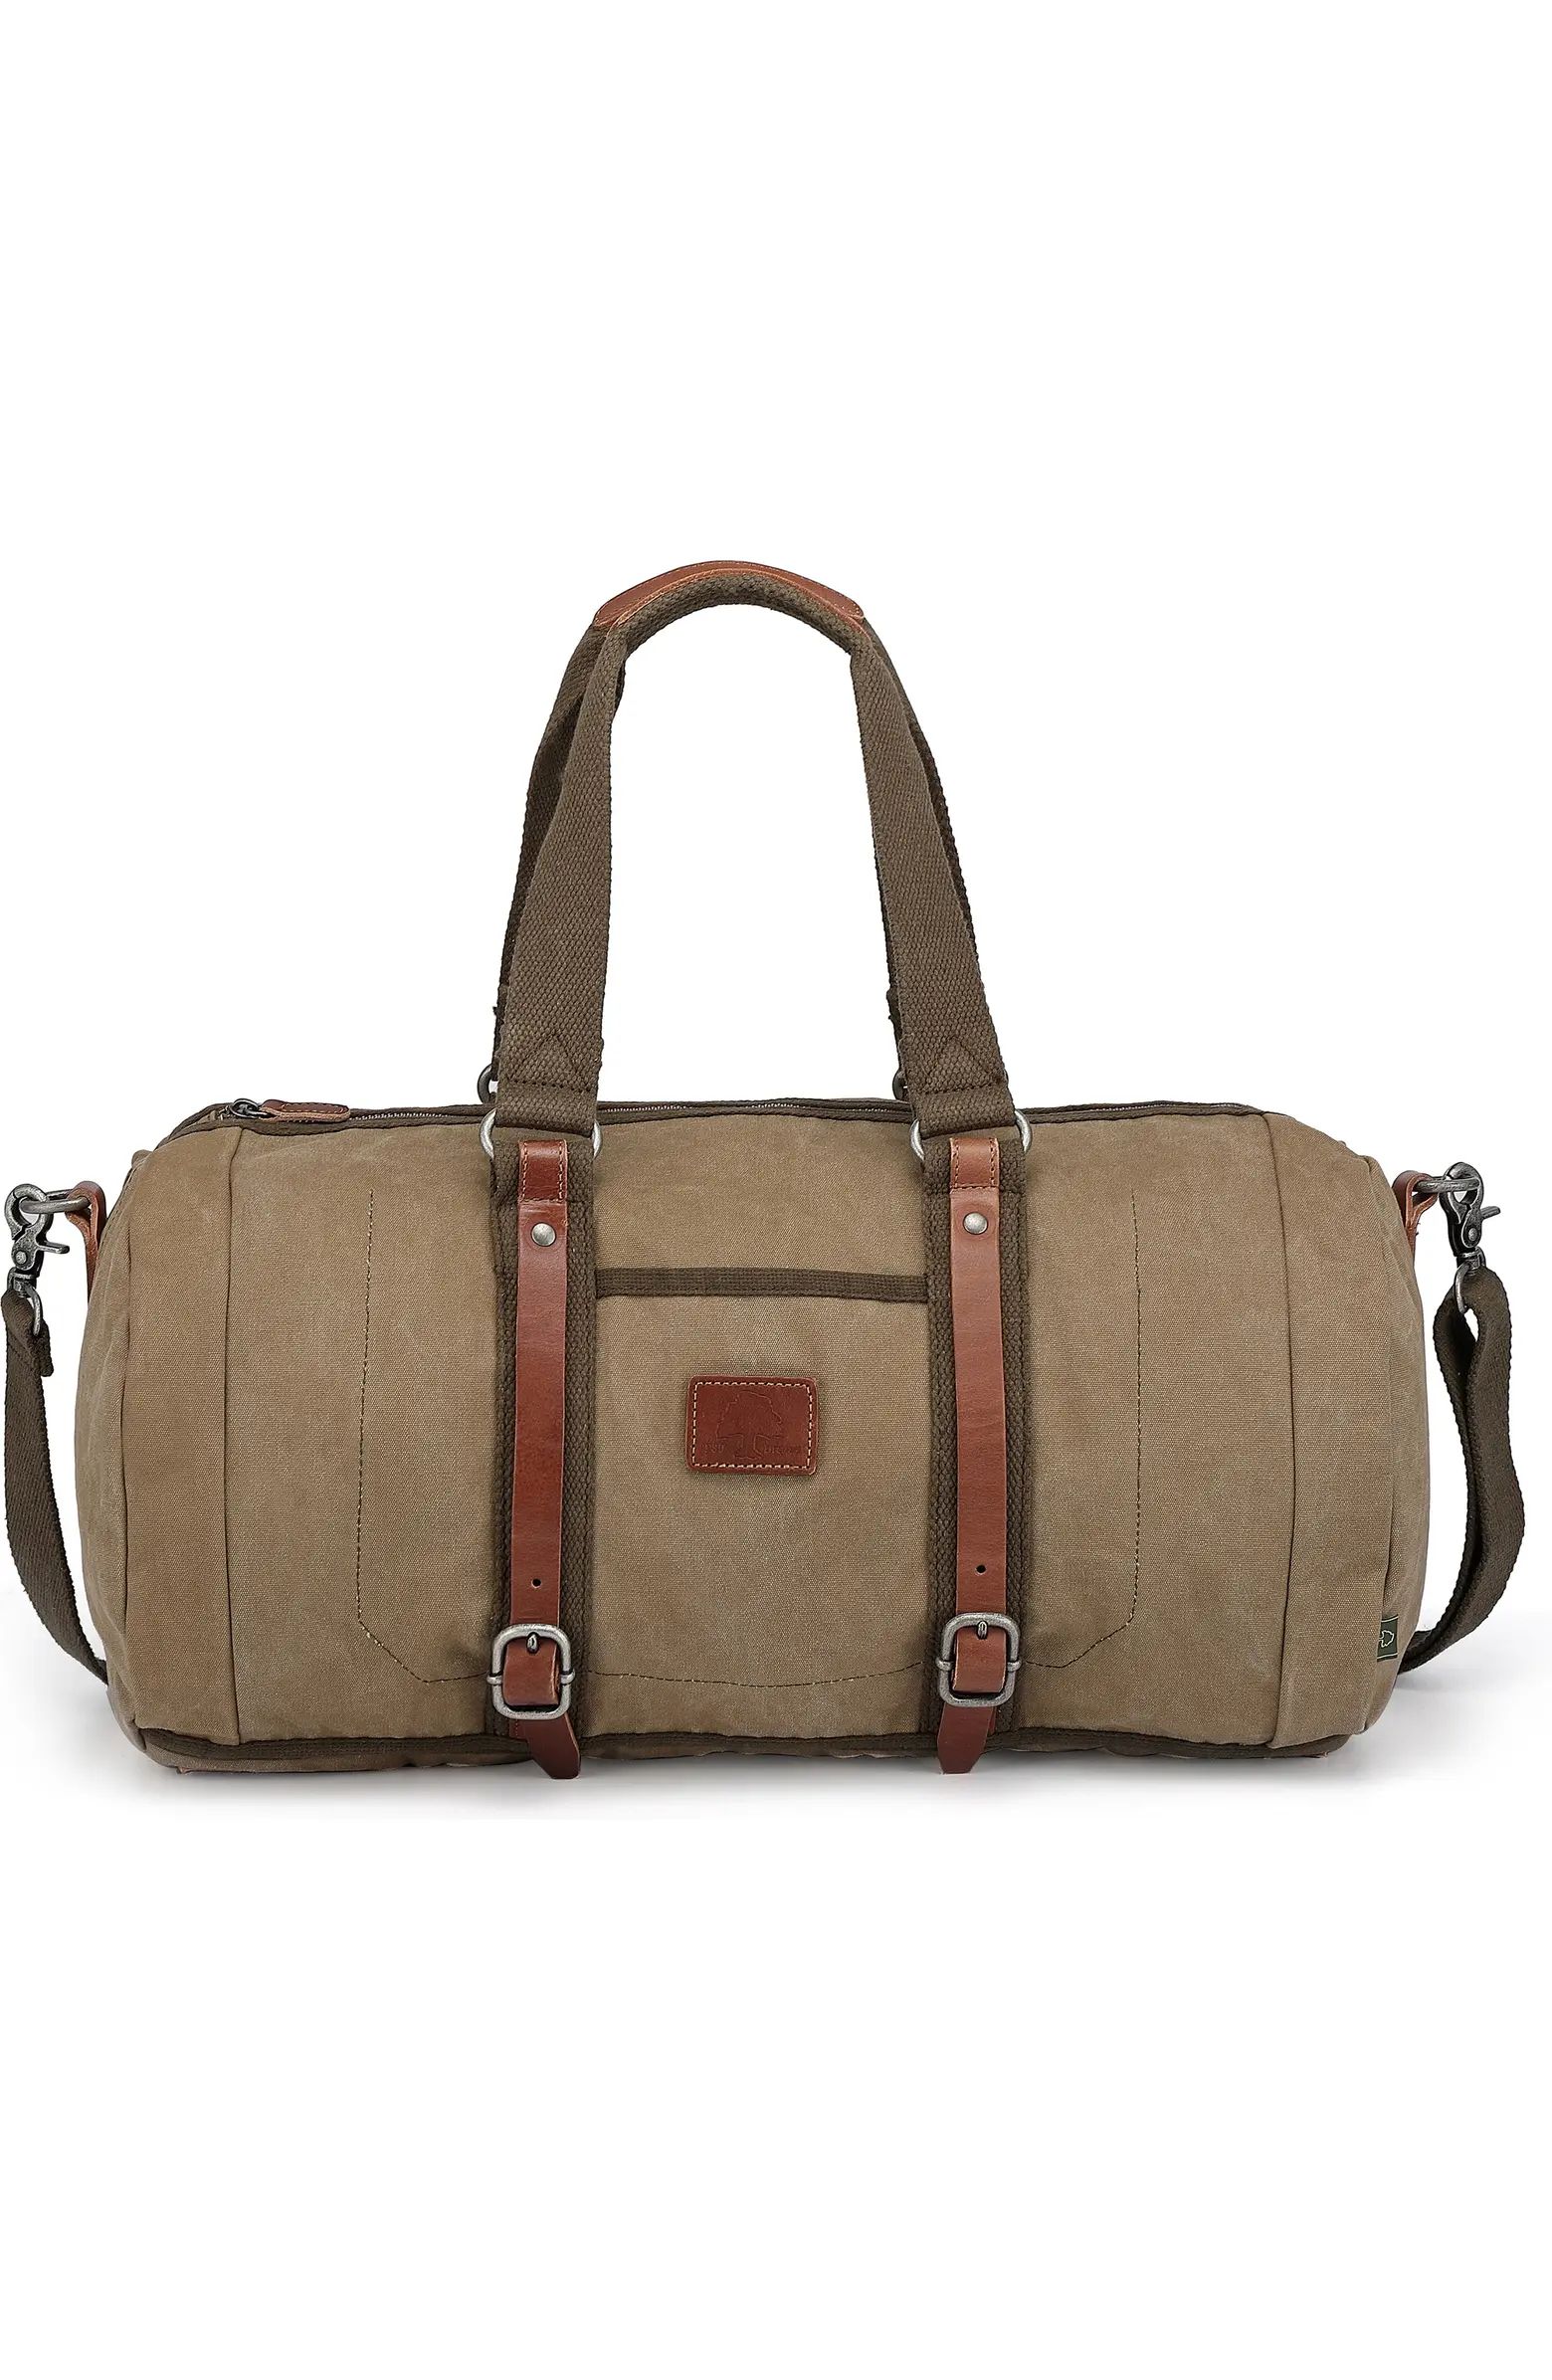 Forest Canvas Duffle Bag | Nordstrom Rack